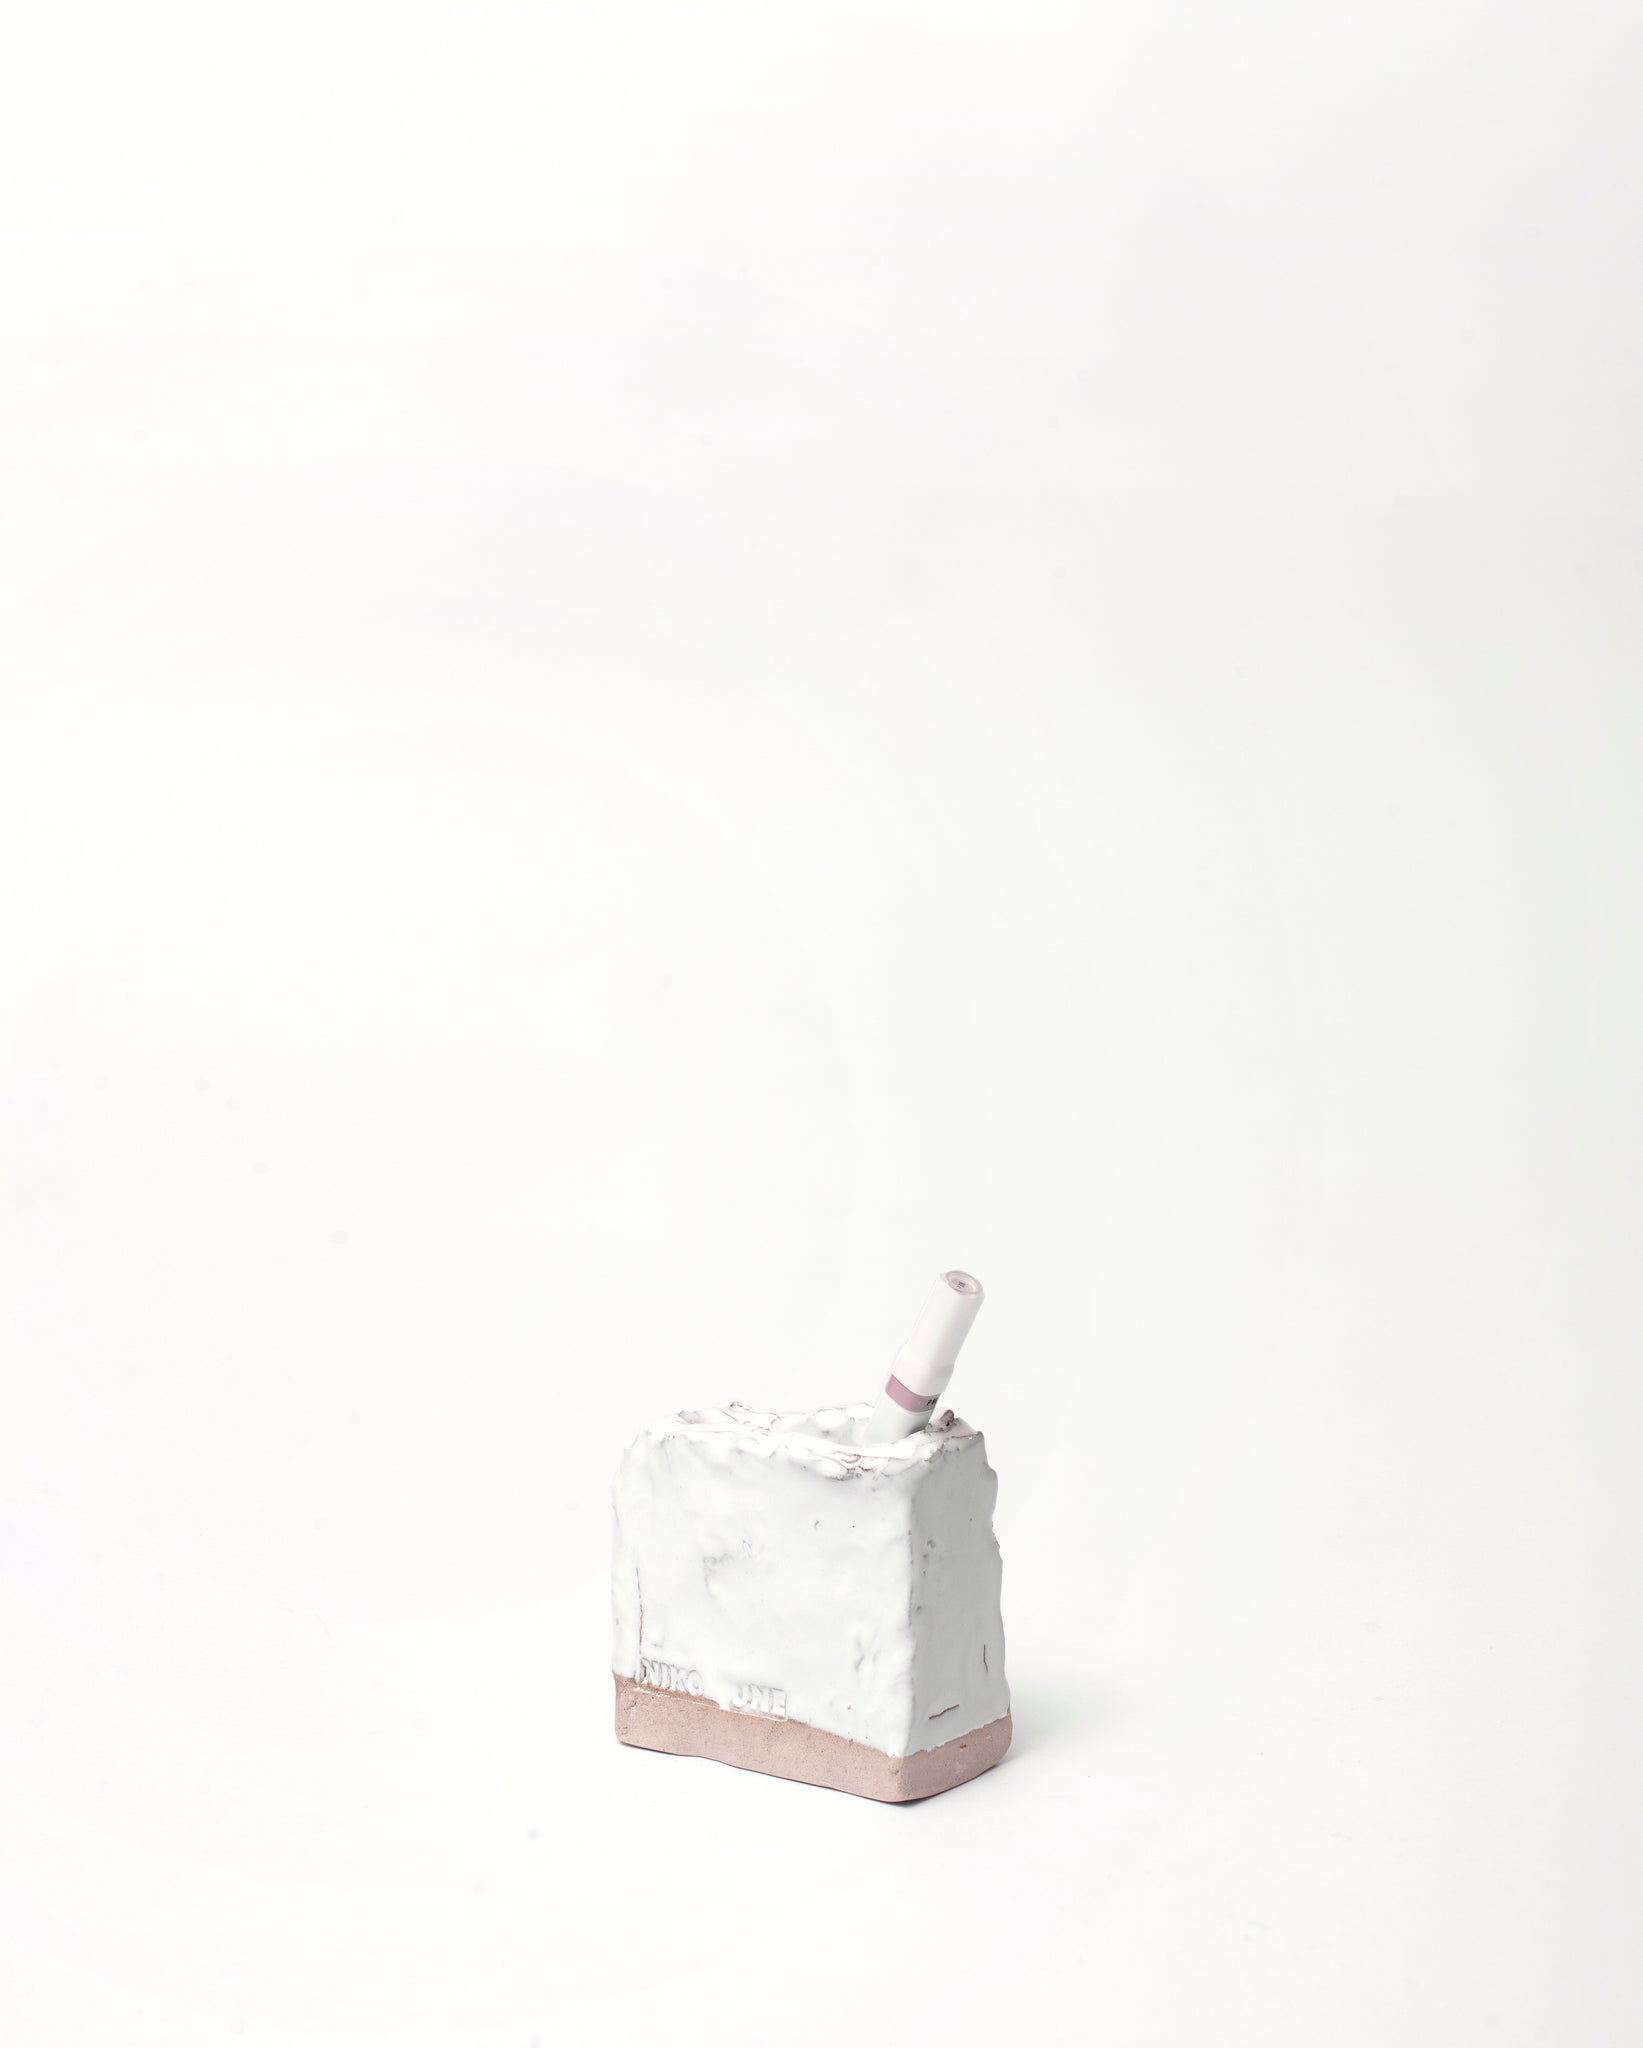 Handmade ceramic organizer object in white glaze in vertical inclination with a pen inside in white background